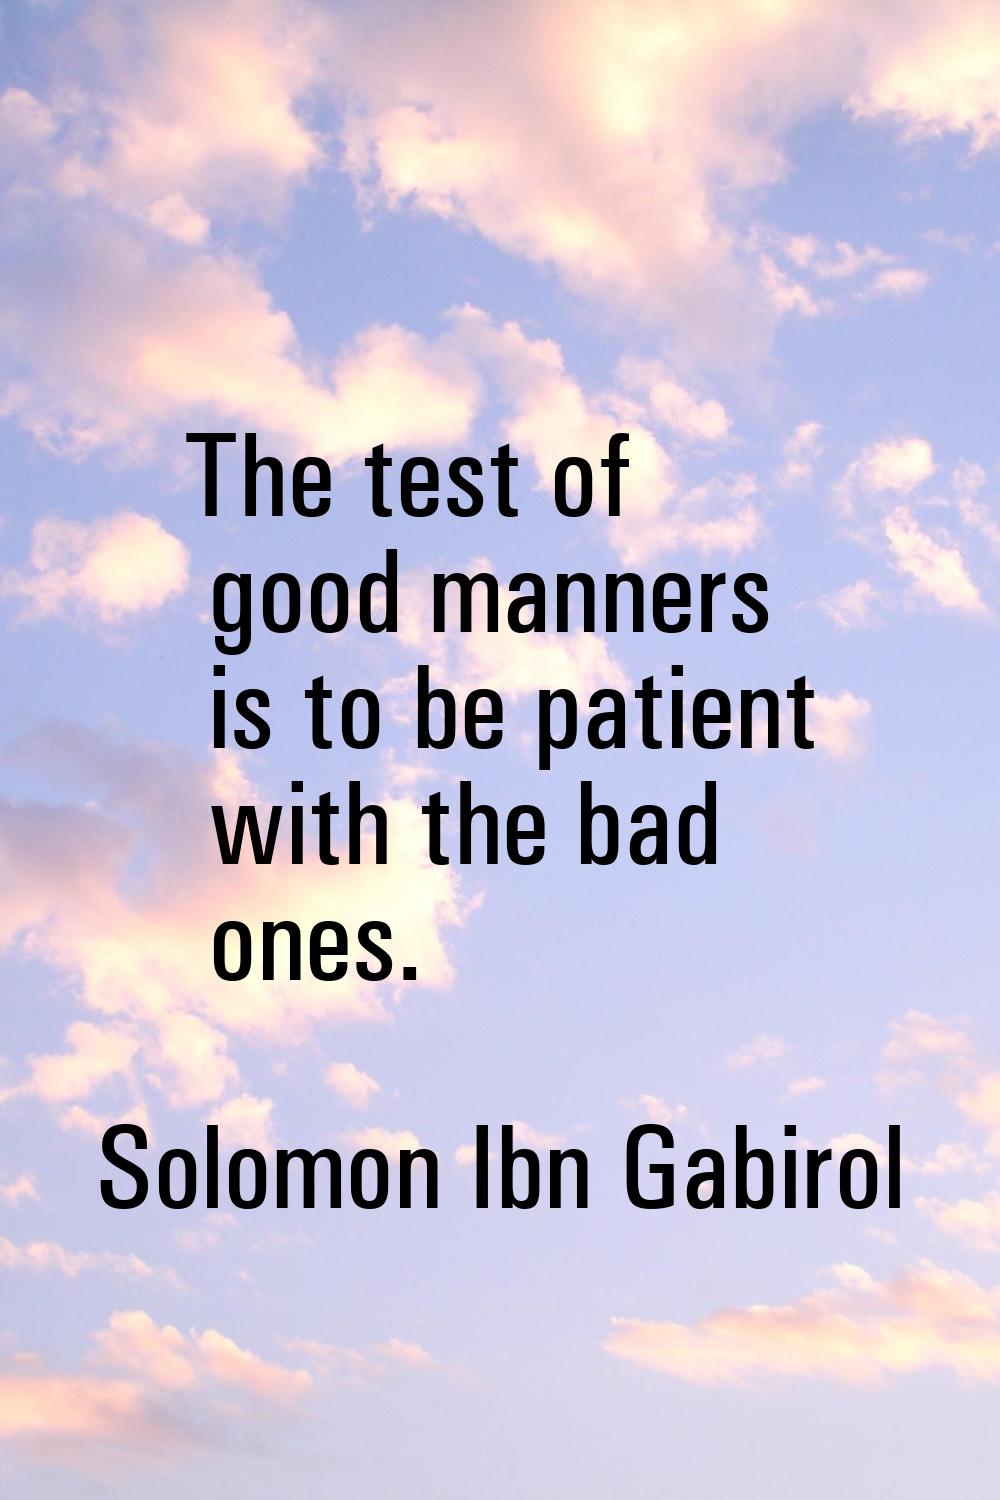 The test of good manners is to be patient with the bad ones.